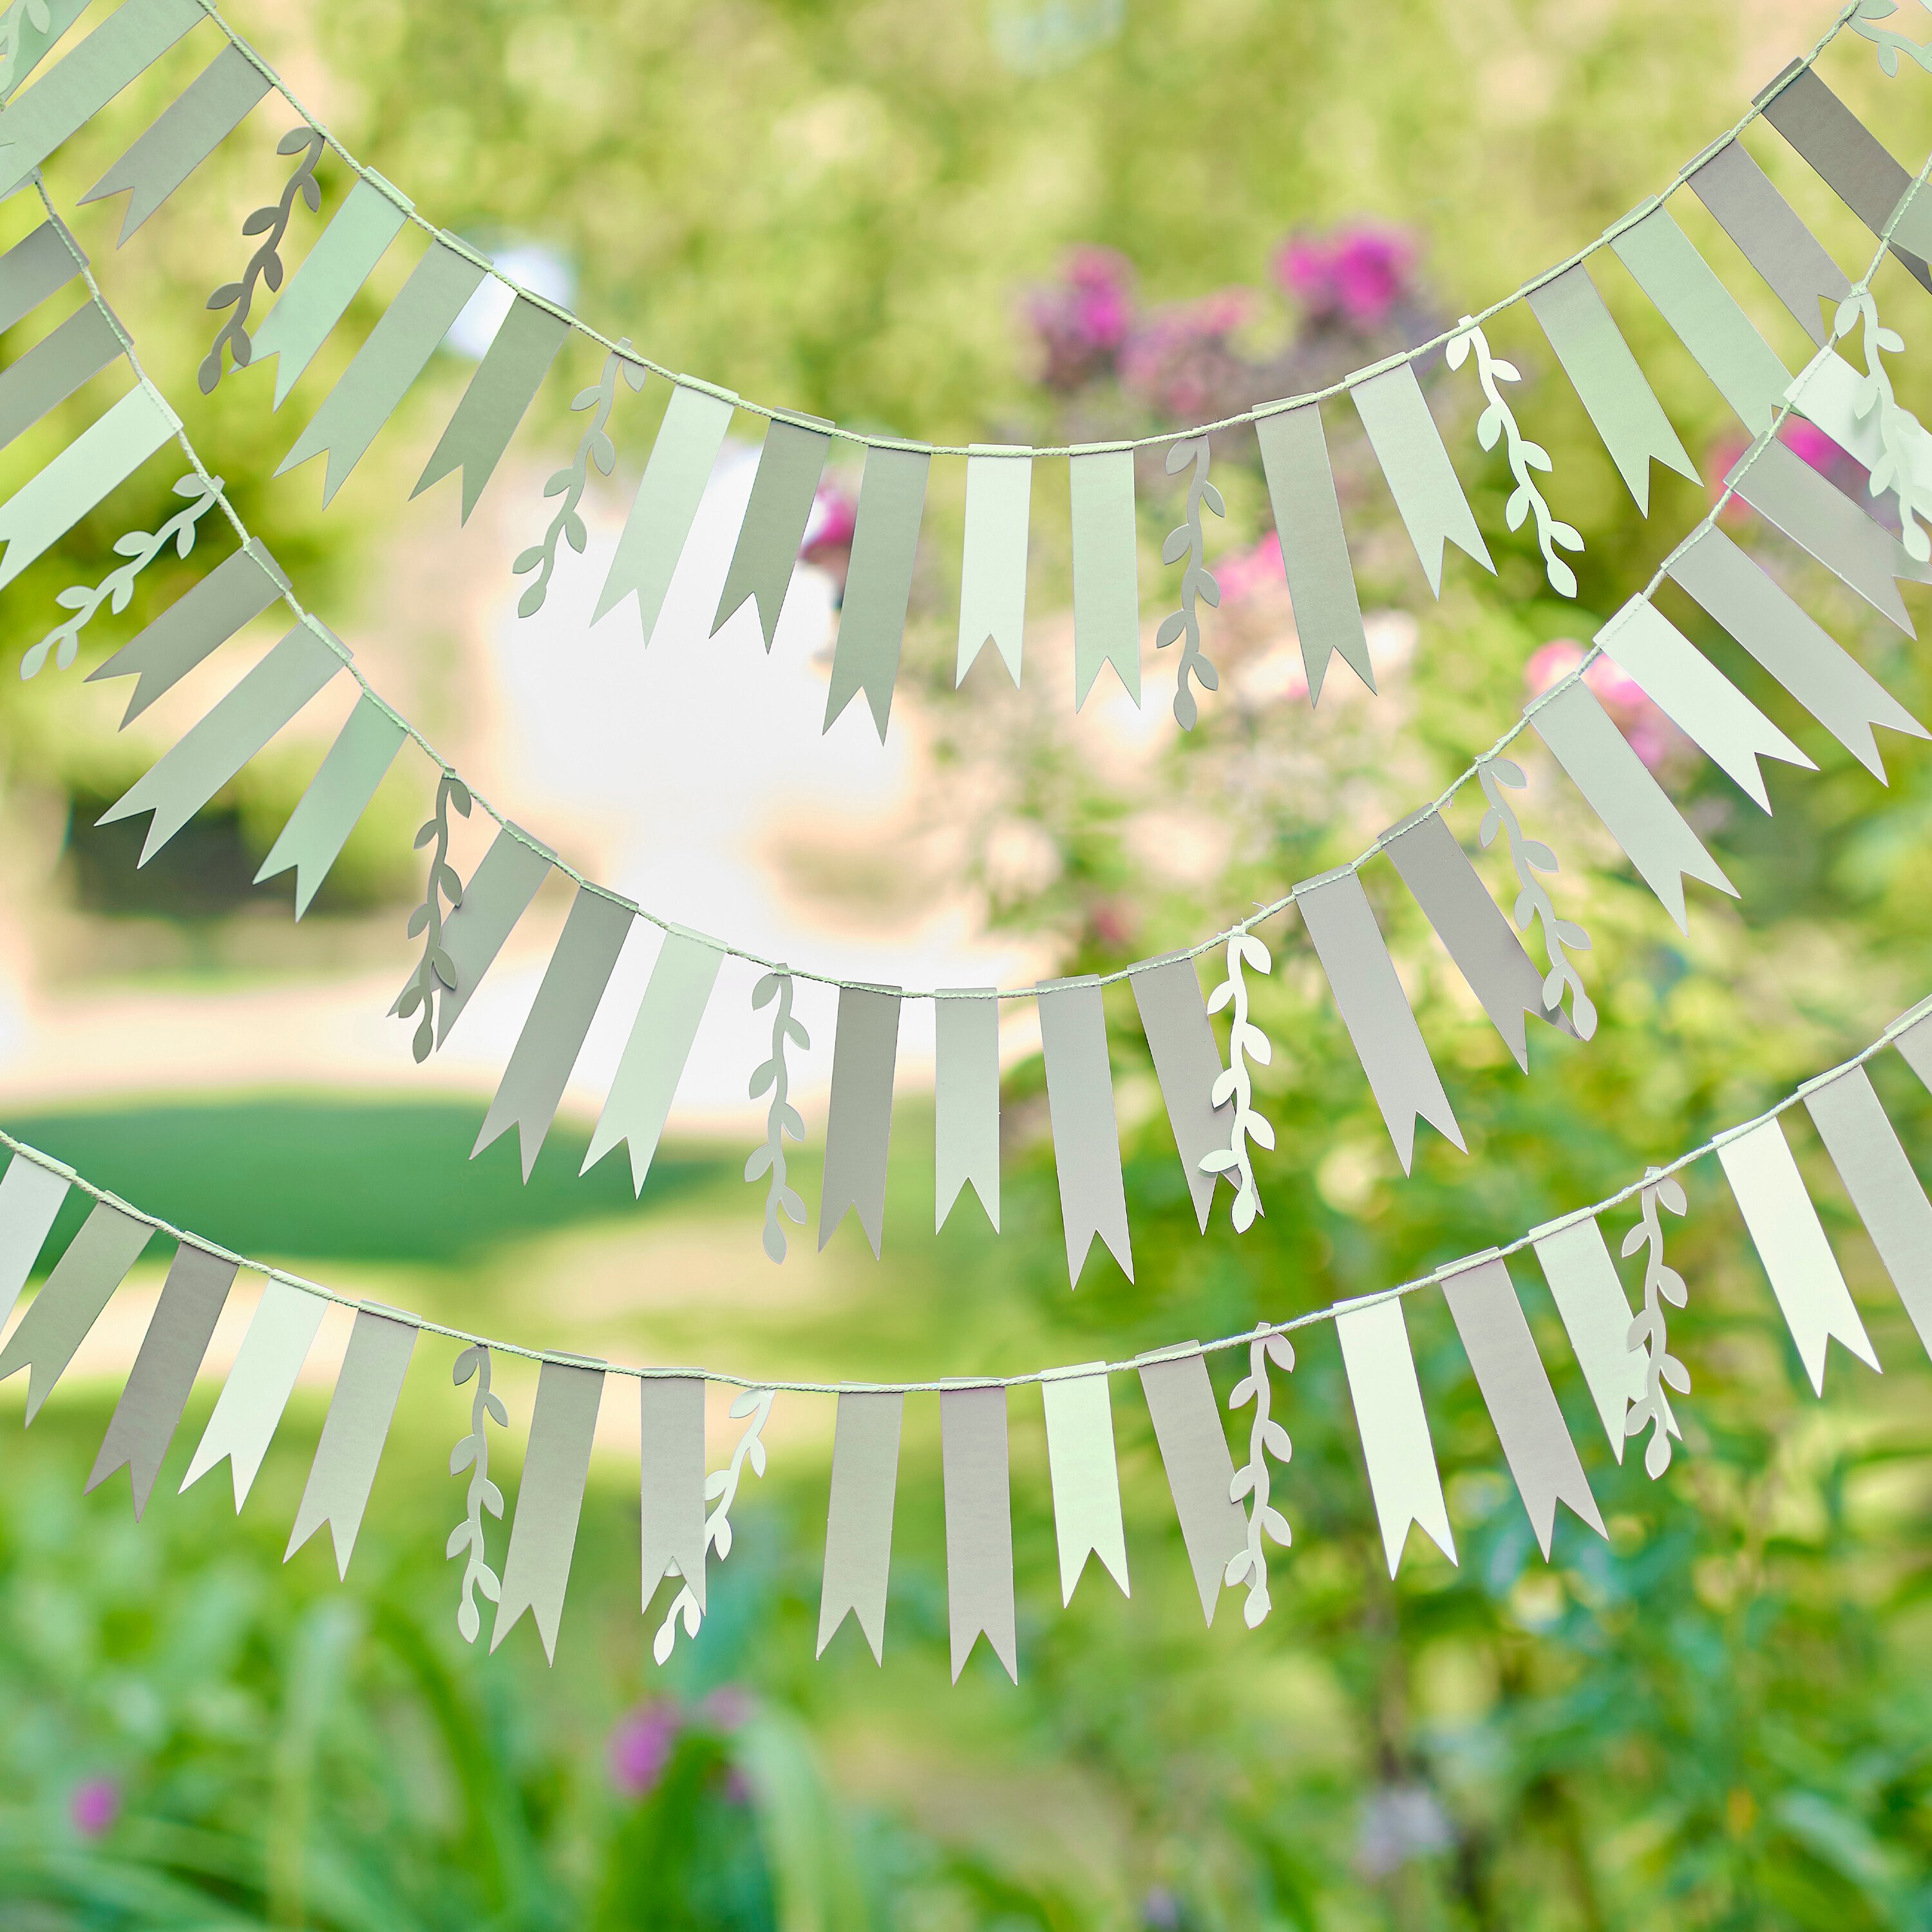 Straw Garland Party Decor Kids Can Help With - Cupcakes and Cutlery